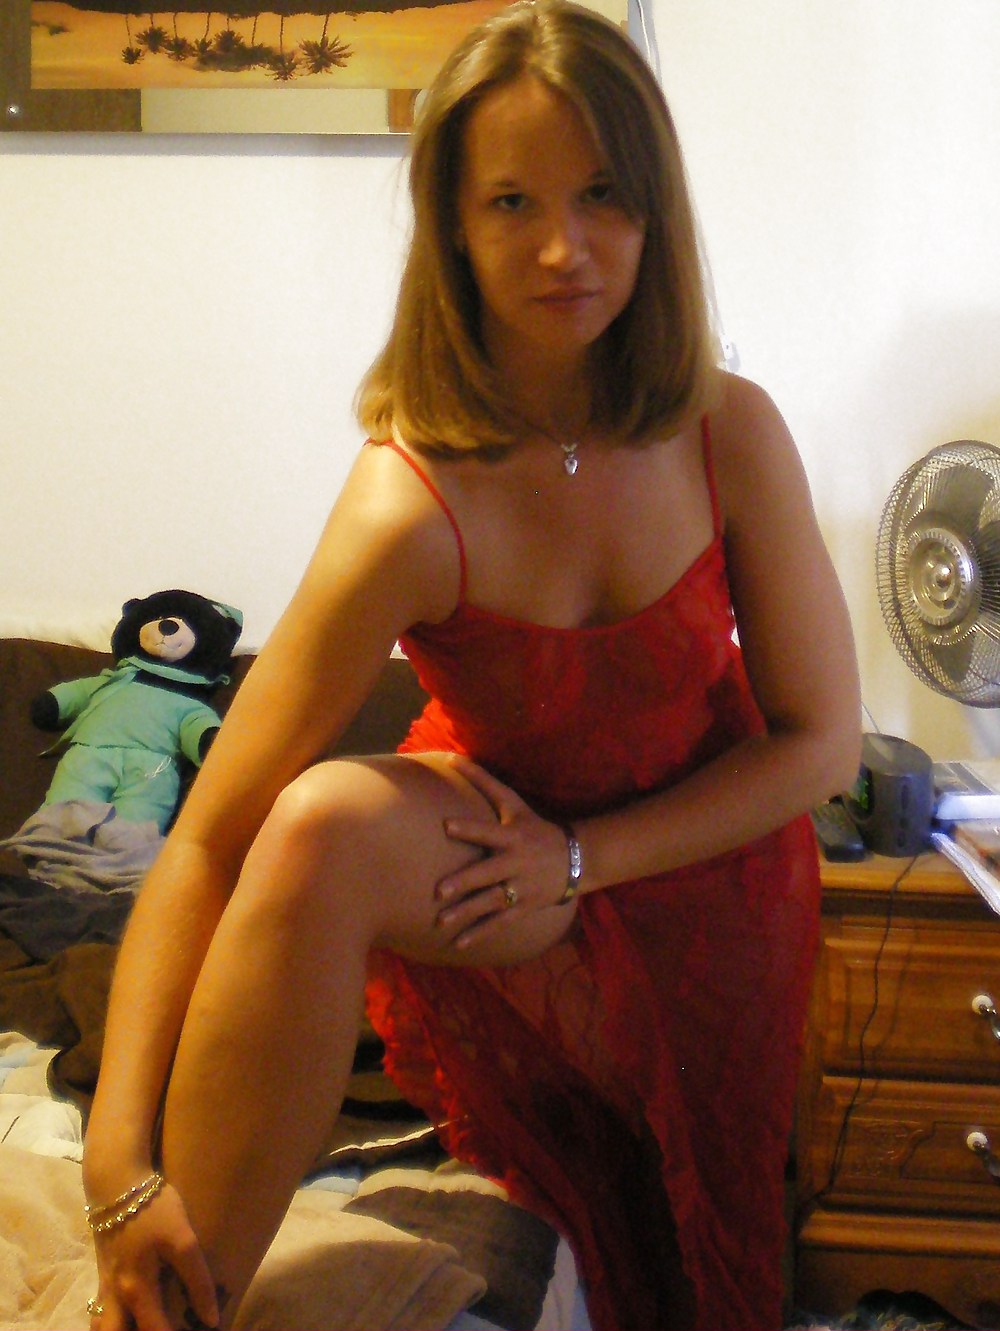 Me in some lingerie and dresses #4509923